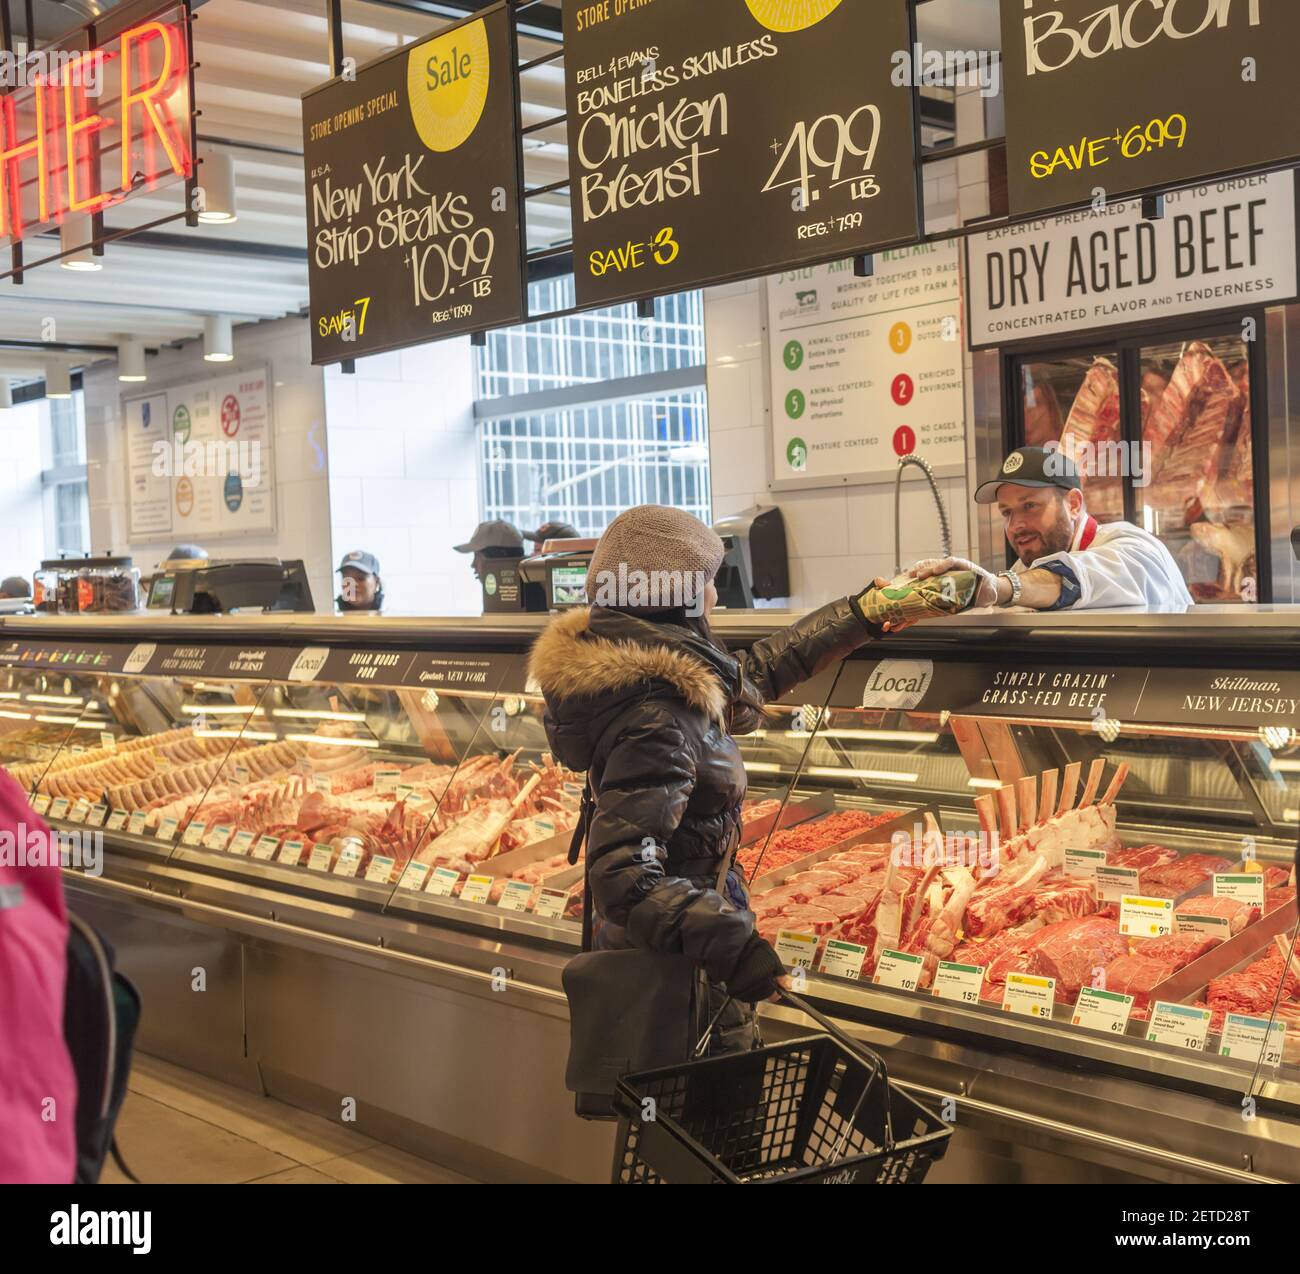 https://c8.alamy.com/comp/2ETD28T/a-shopper-chooses-cuts-of-meat-in-the-new-whole-foods-market-opposite-bryant-park-in-new-york-on-opening-day-saturday-january-28-2017-the-store-in-midtown-manhattan-is-the-chains-11th-store-to-open-in-the-city-the-store-has-a-large-selection-of-prepared-foods-from-a-diverse-group-of-vendors-inside-the-store-photo-by-richard-b-levine-please-use-credit-from-credit-field-2ETD28T.jpg